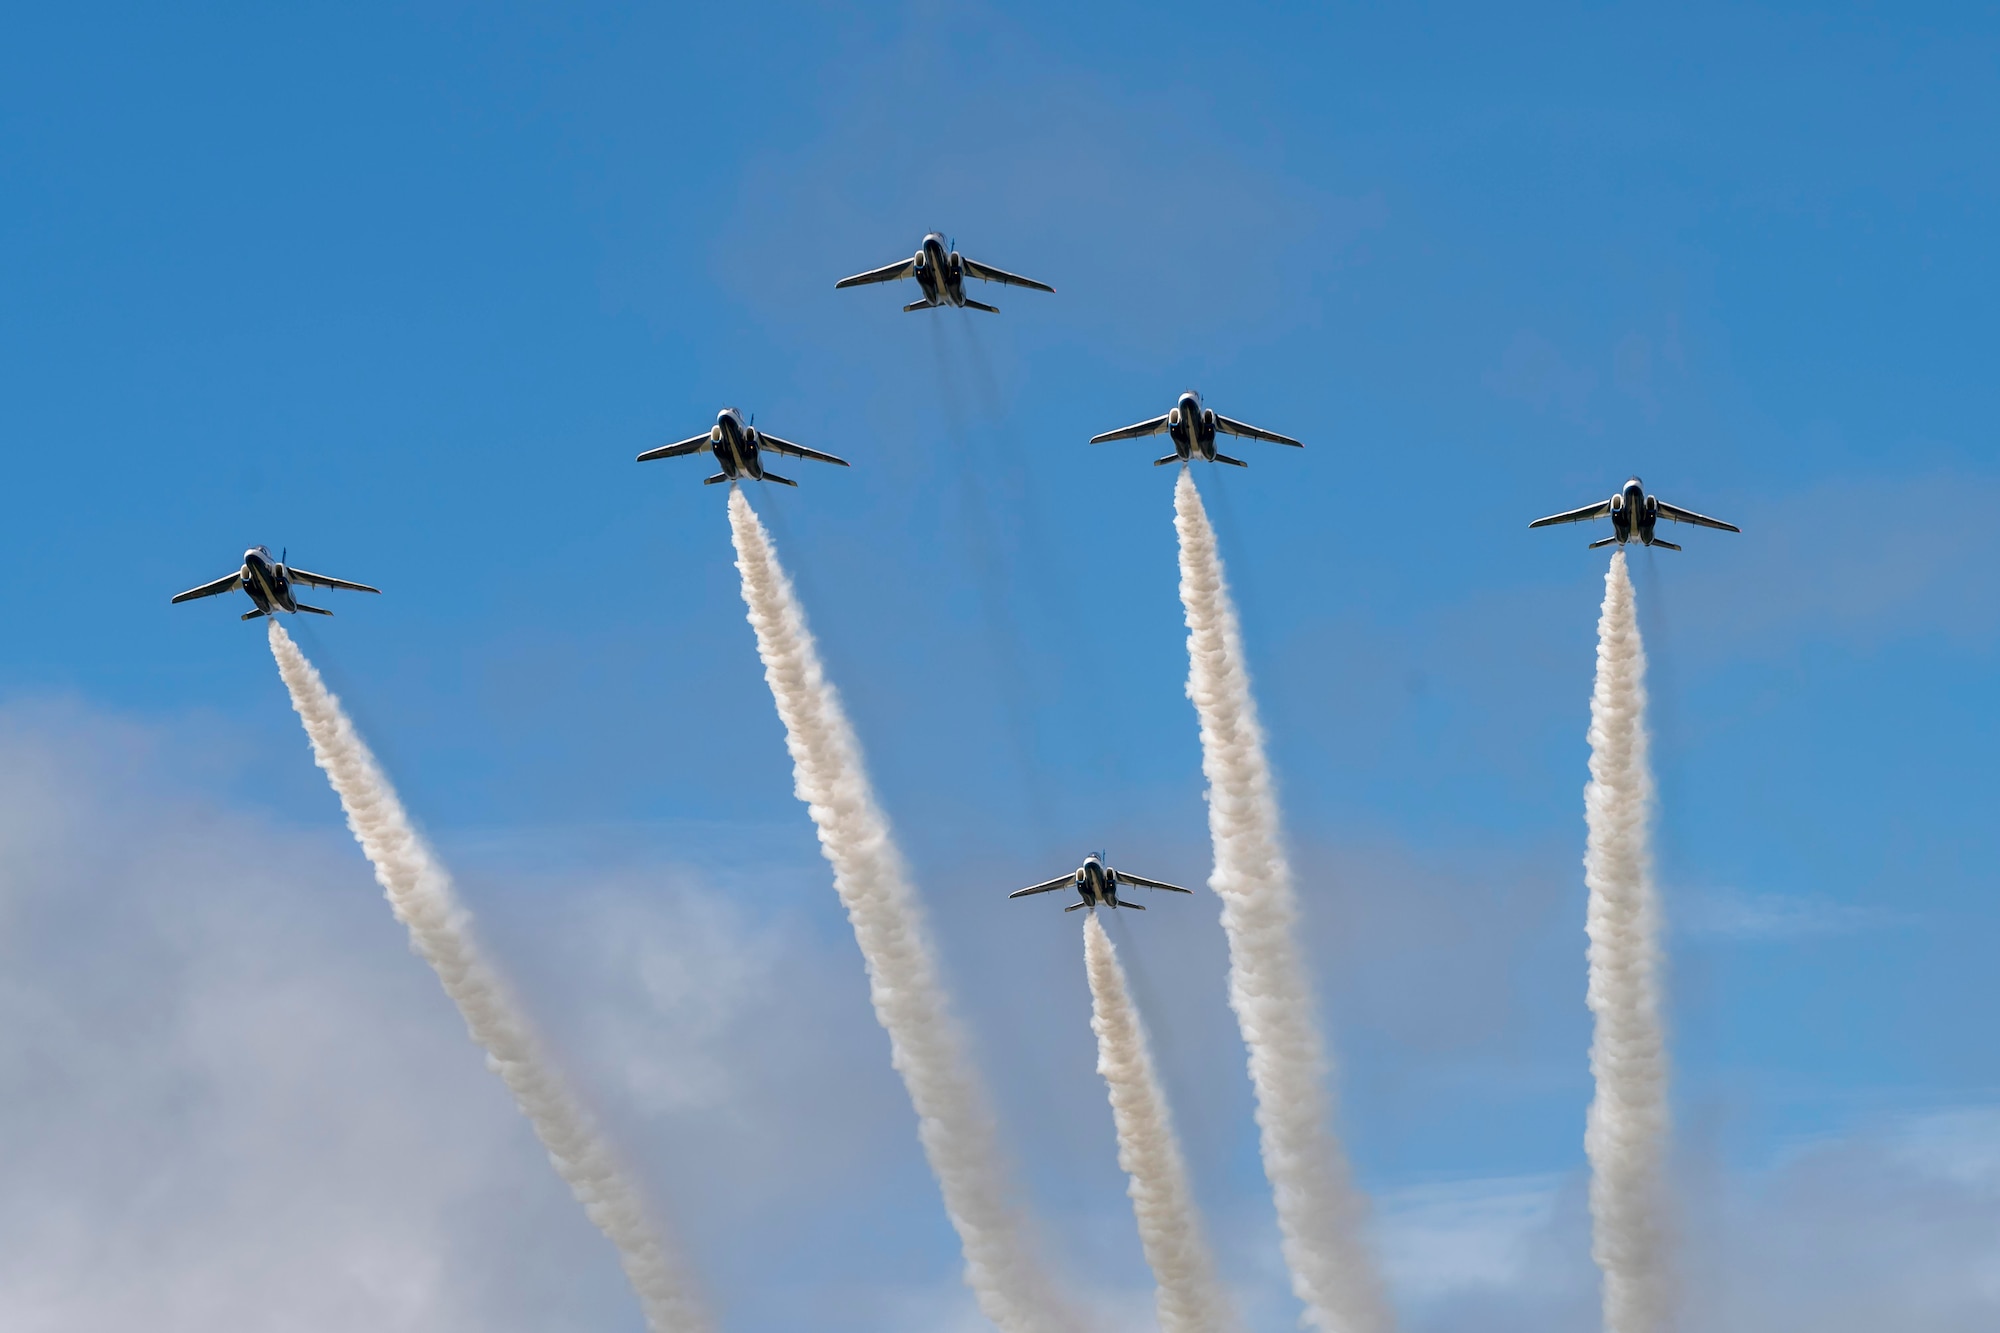 A group of six jets preforming fly over in the sky.